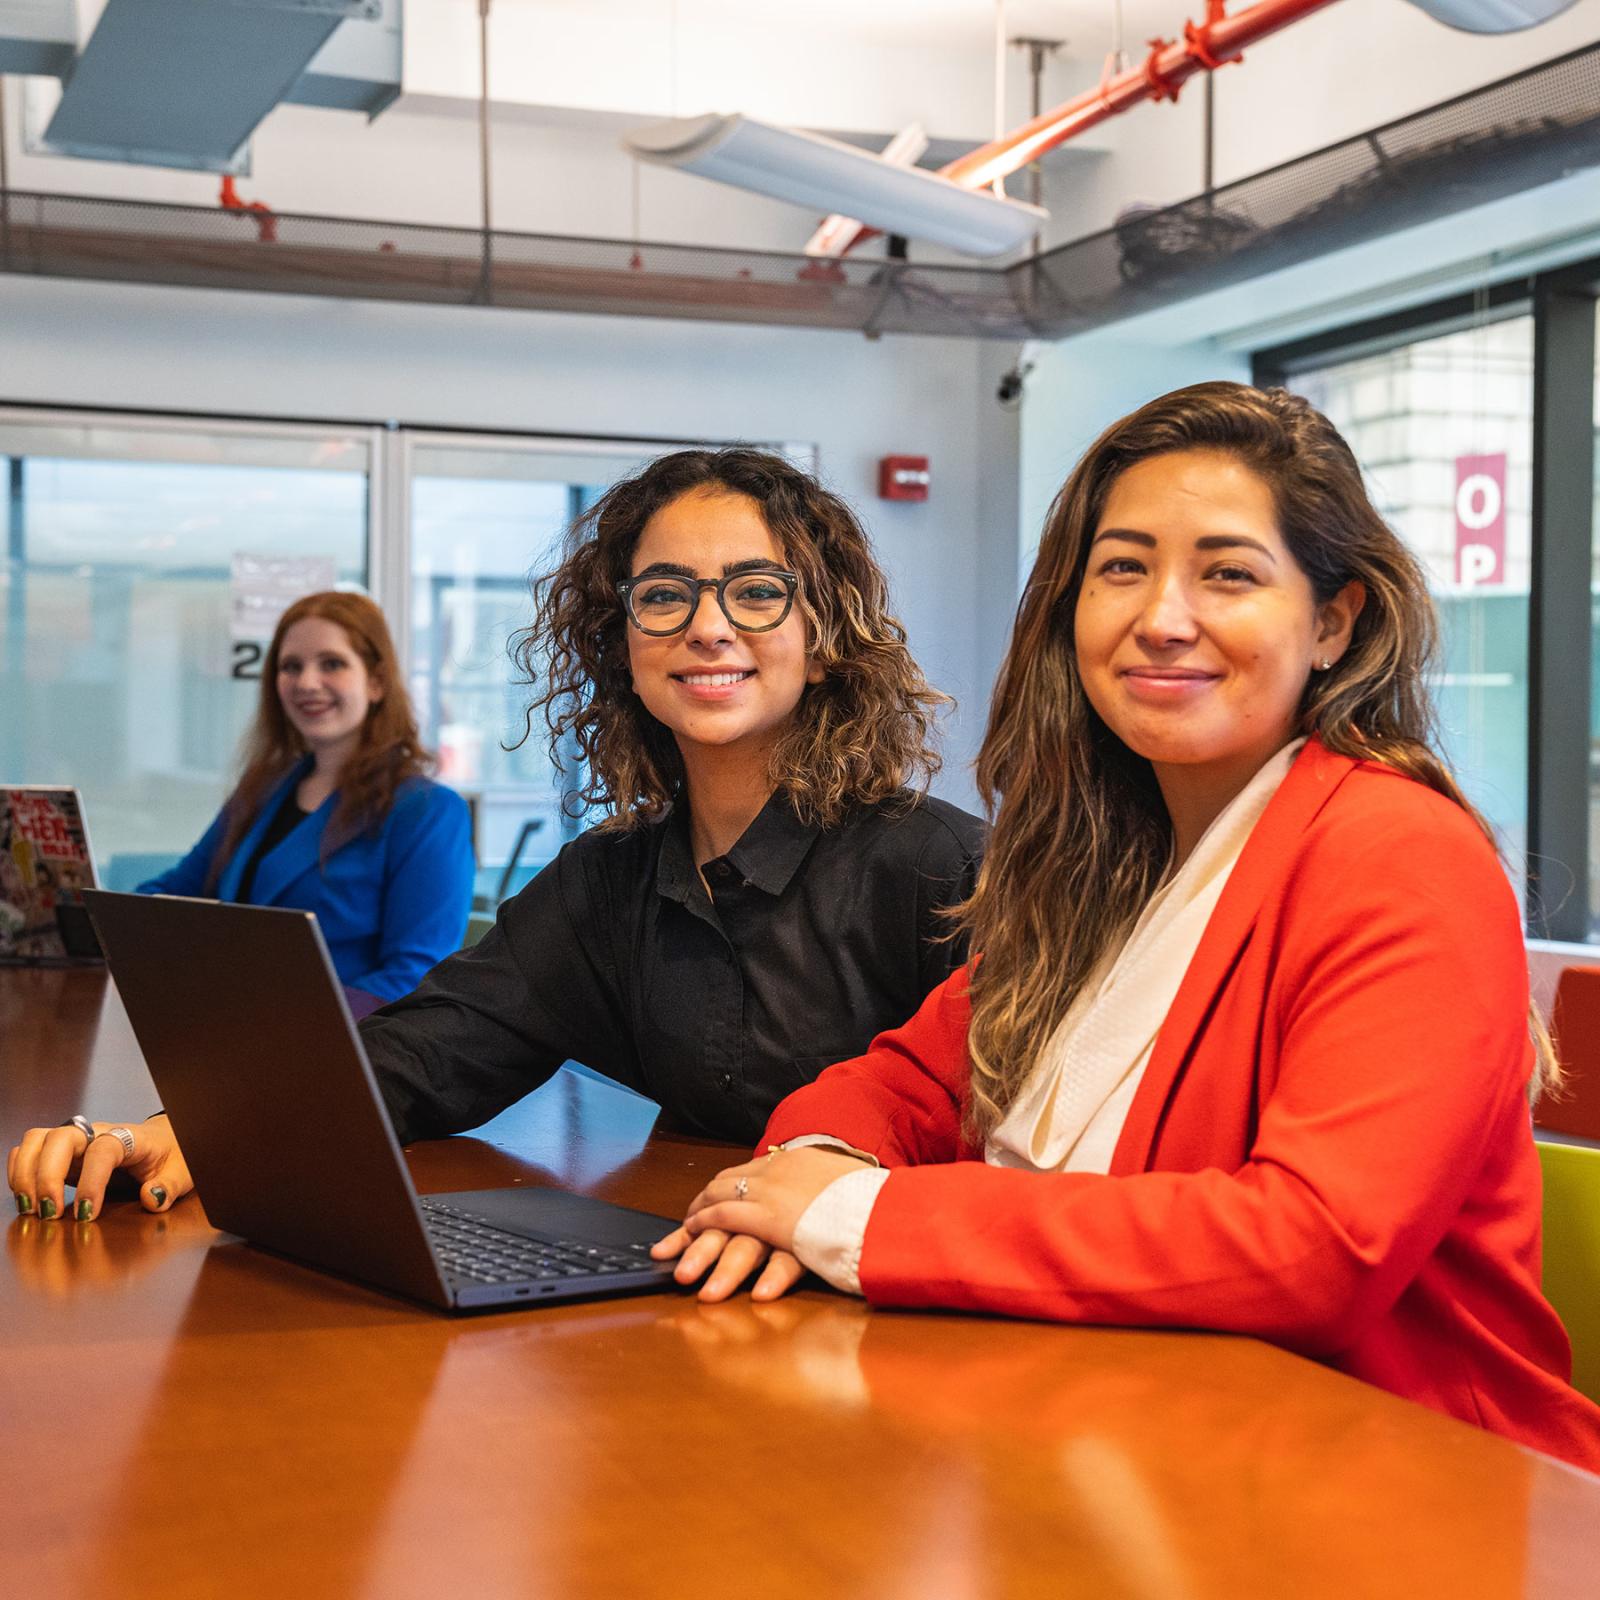 Two women sitting in front of a laptop smiling at the camera.